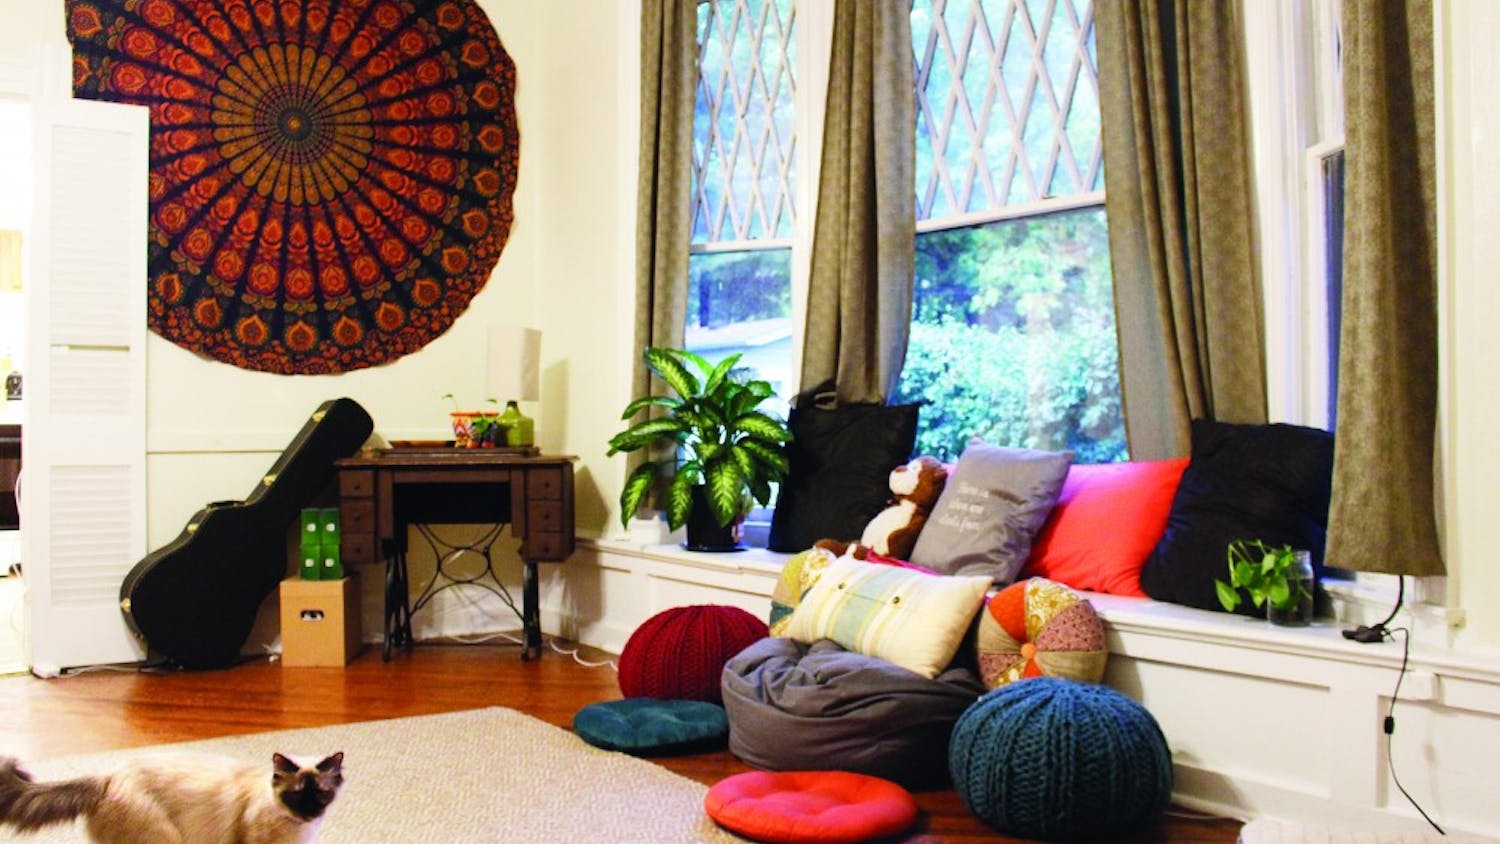 Using decorations like pillows and tapestries can add color to a living or dining room.Senior hannah roman said that plants bring both life and color to a room.